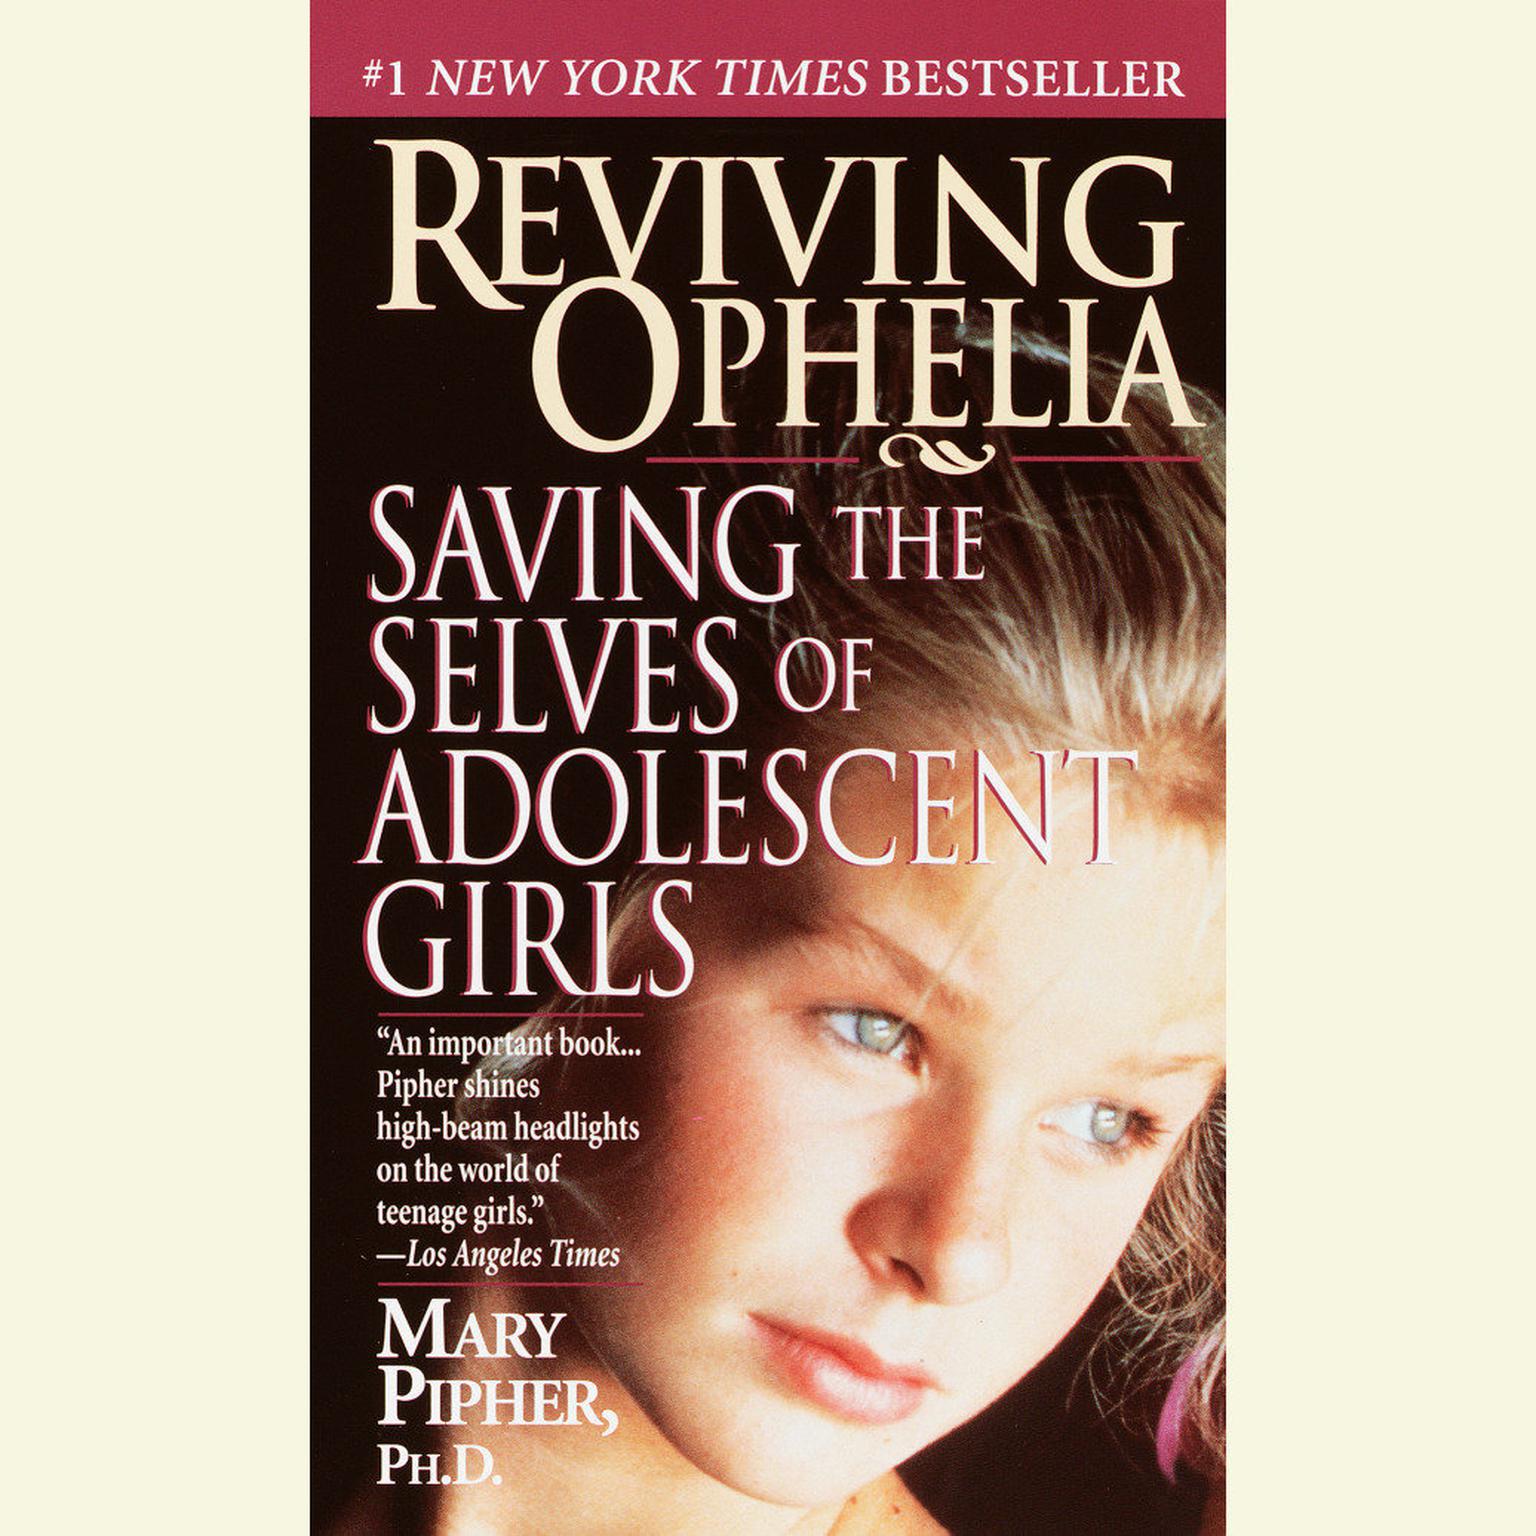 Reviving Ophelia (Abridged): Saving the Lives of Adolescent Girls Audiobook, by Mary Pipher